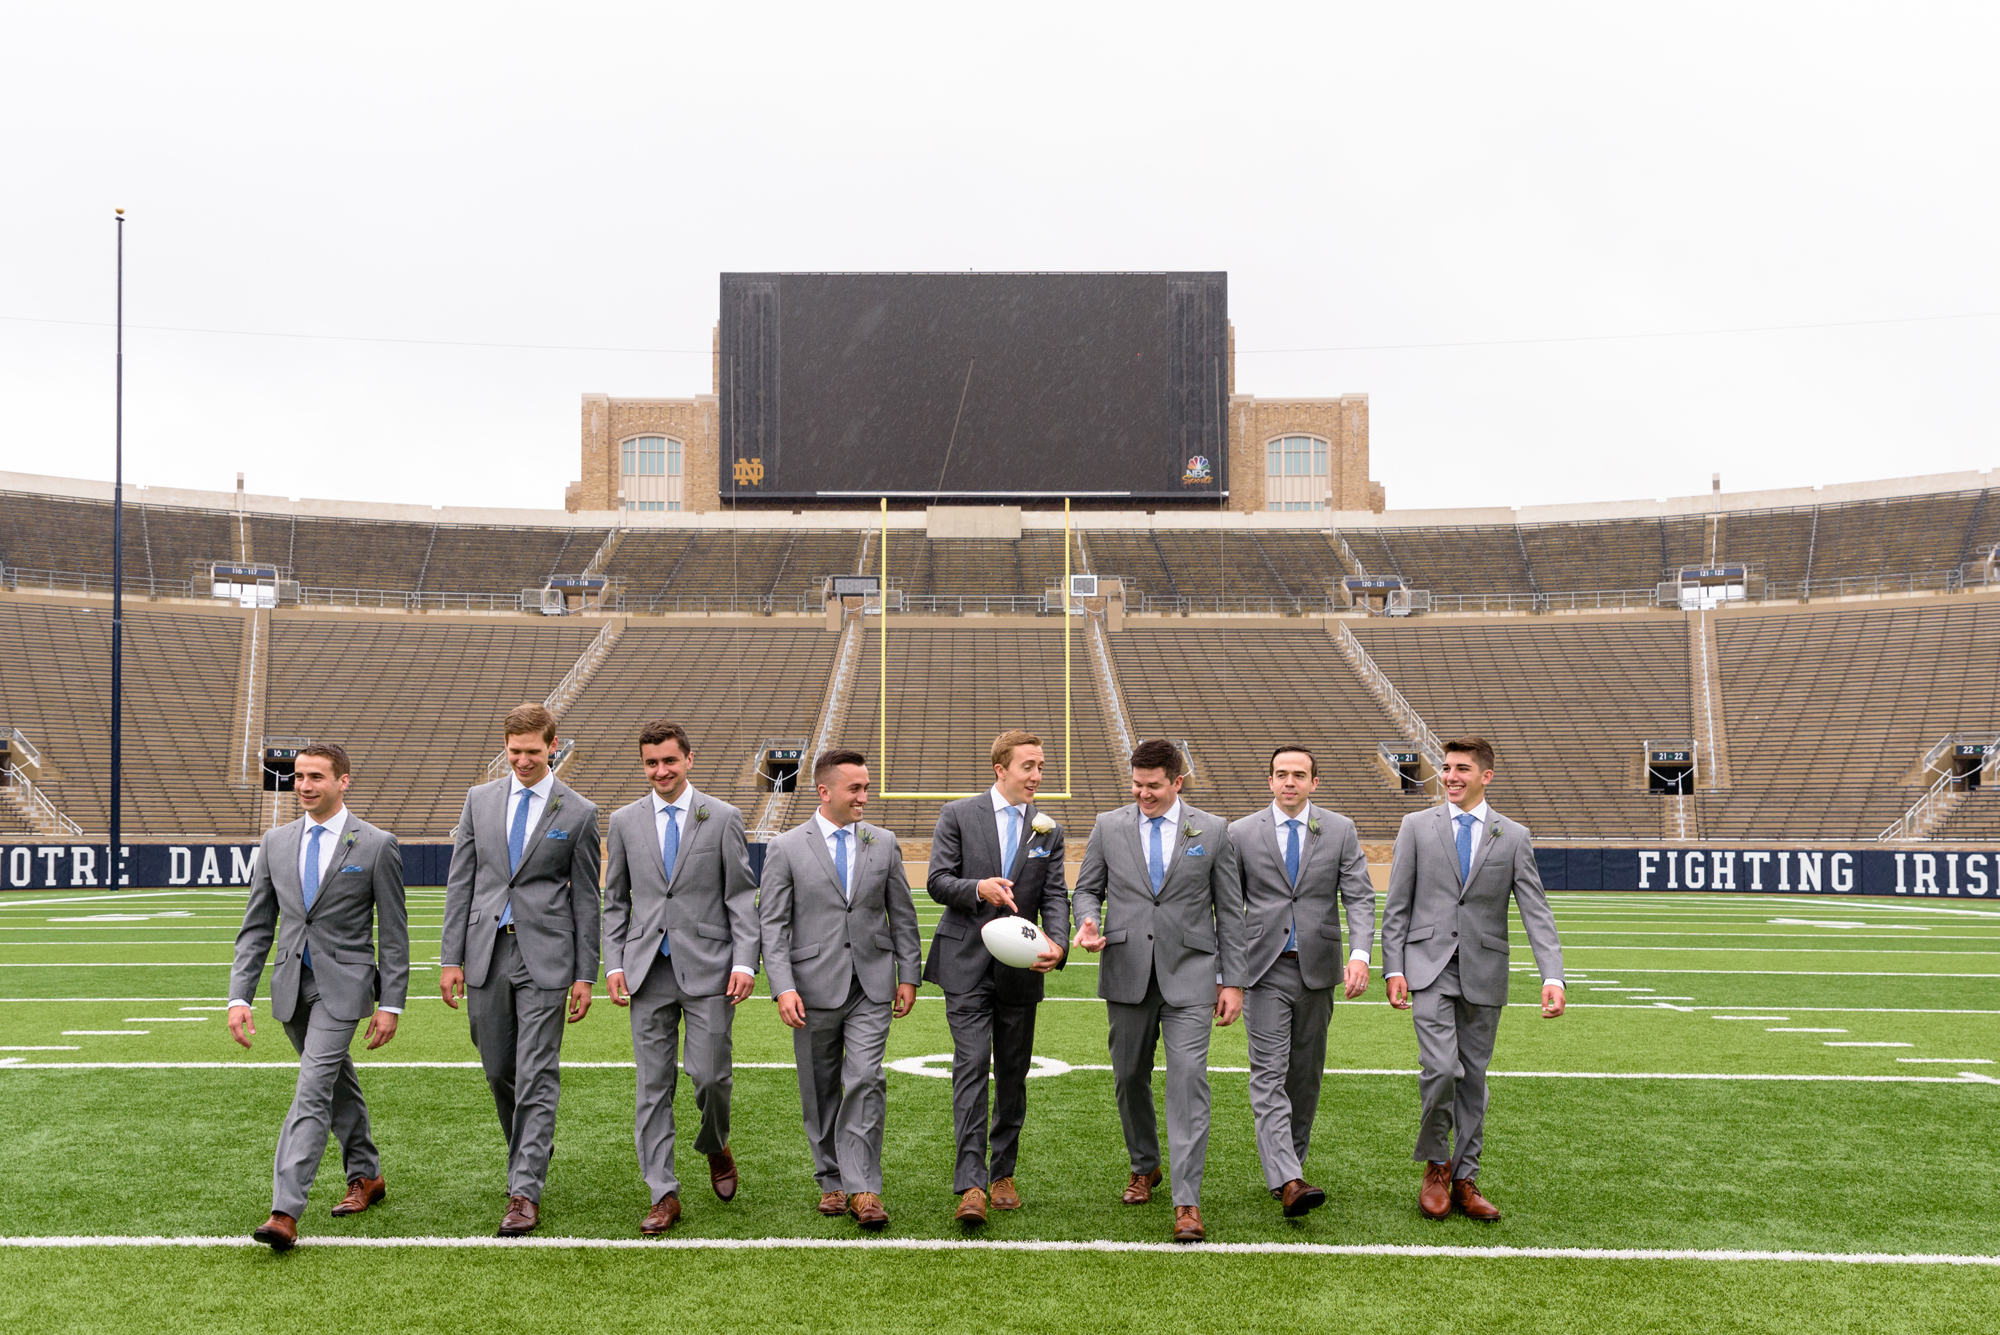 Groomsmen on Notre Dame football field after their wedding ceremony at the Basilica of the Sacred Heart on the campus of the University of Notre Dame